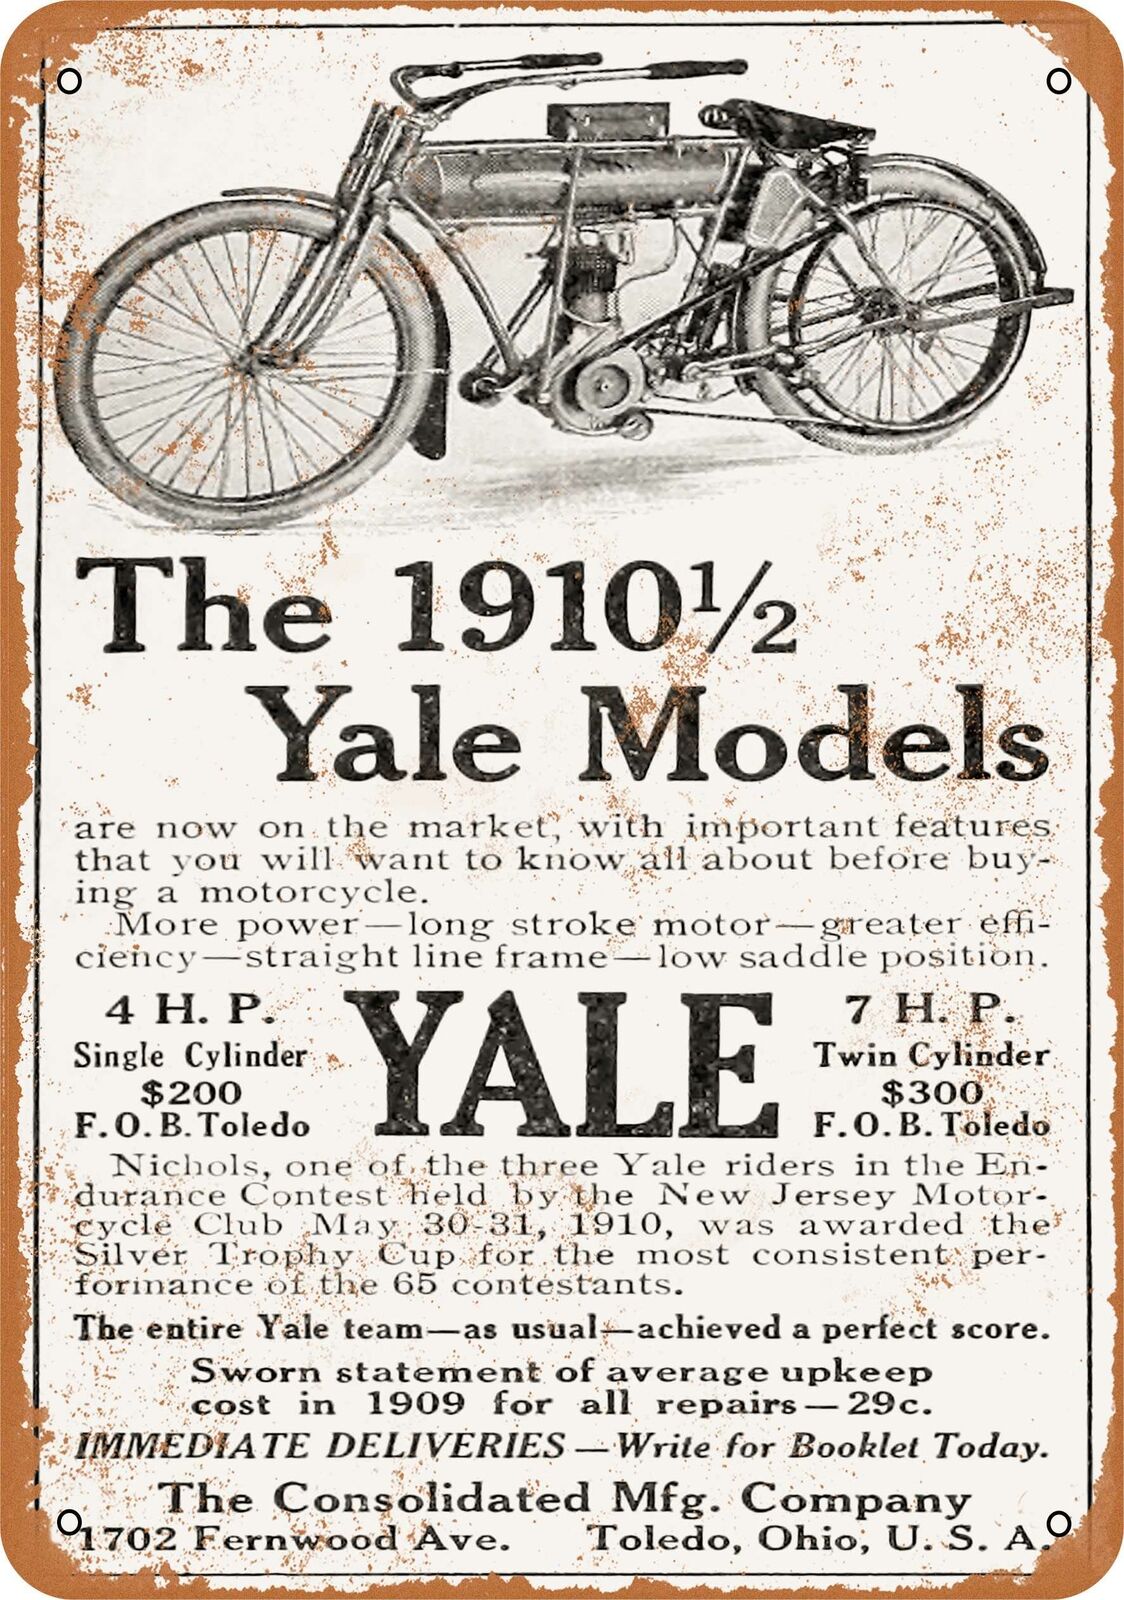 Metal Sign - 1910 Yale Motorcycles - Vintage Look Reproduction